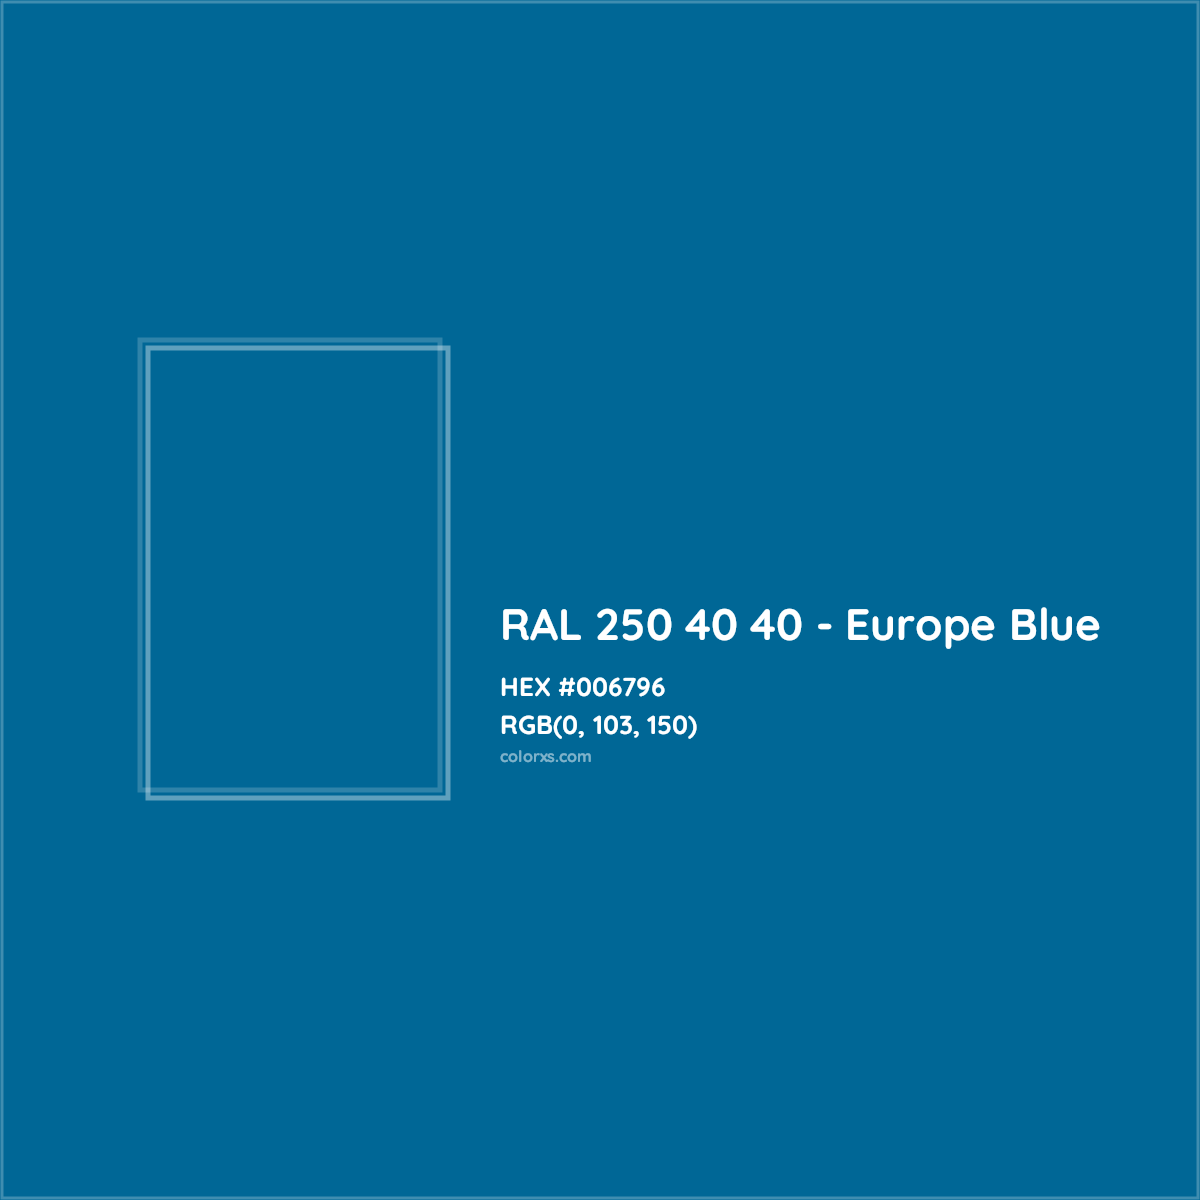 HEX #006796 RAL 250 40 40 - Europe Blue CMS RAL Design - Color Code